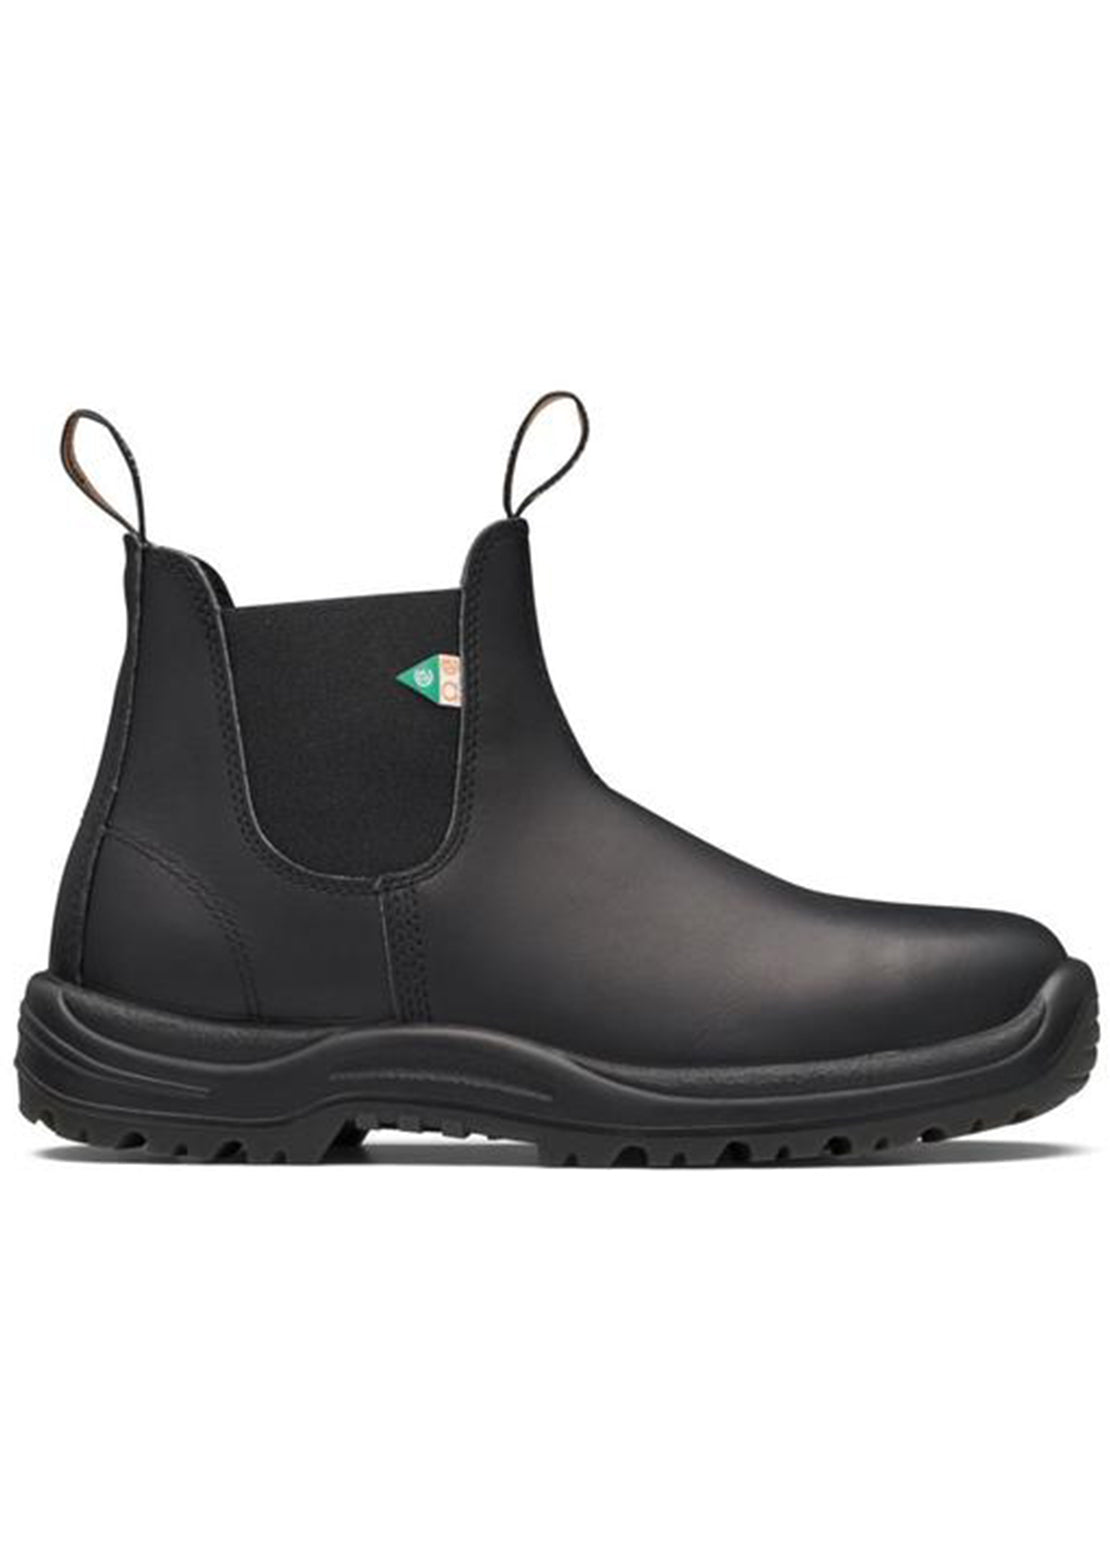 Blundstone 163 CSA Greenpatch Safety Boots Black